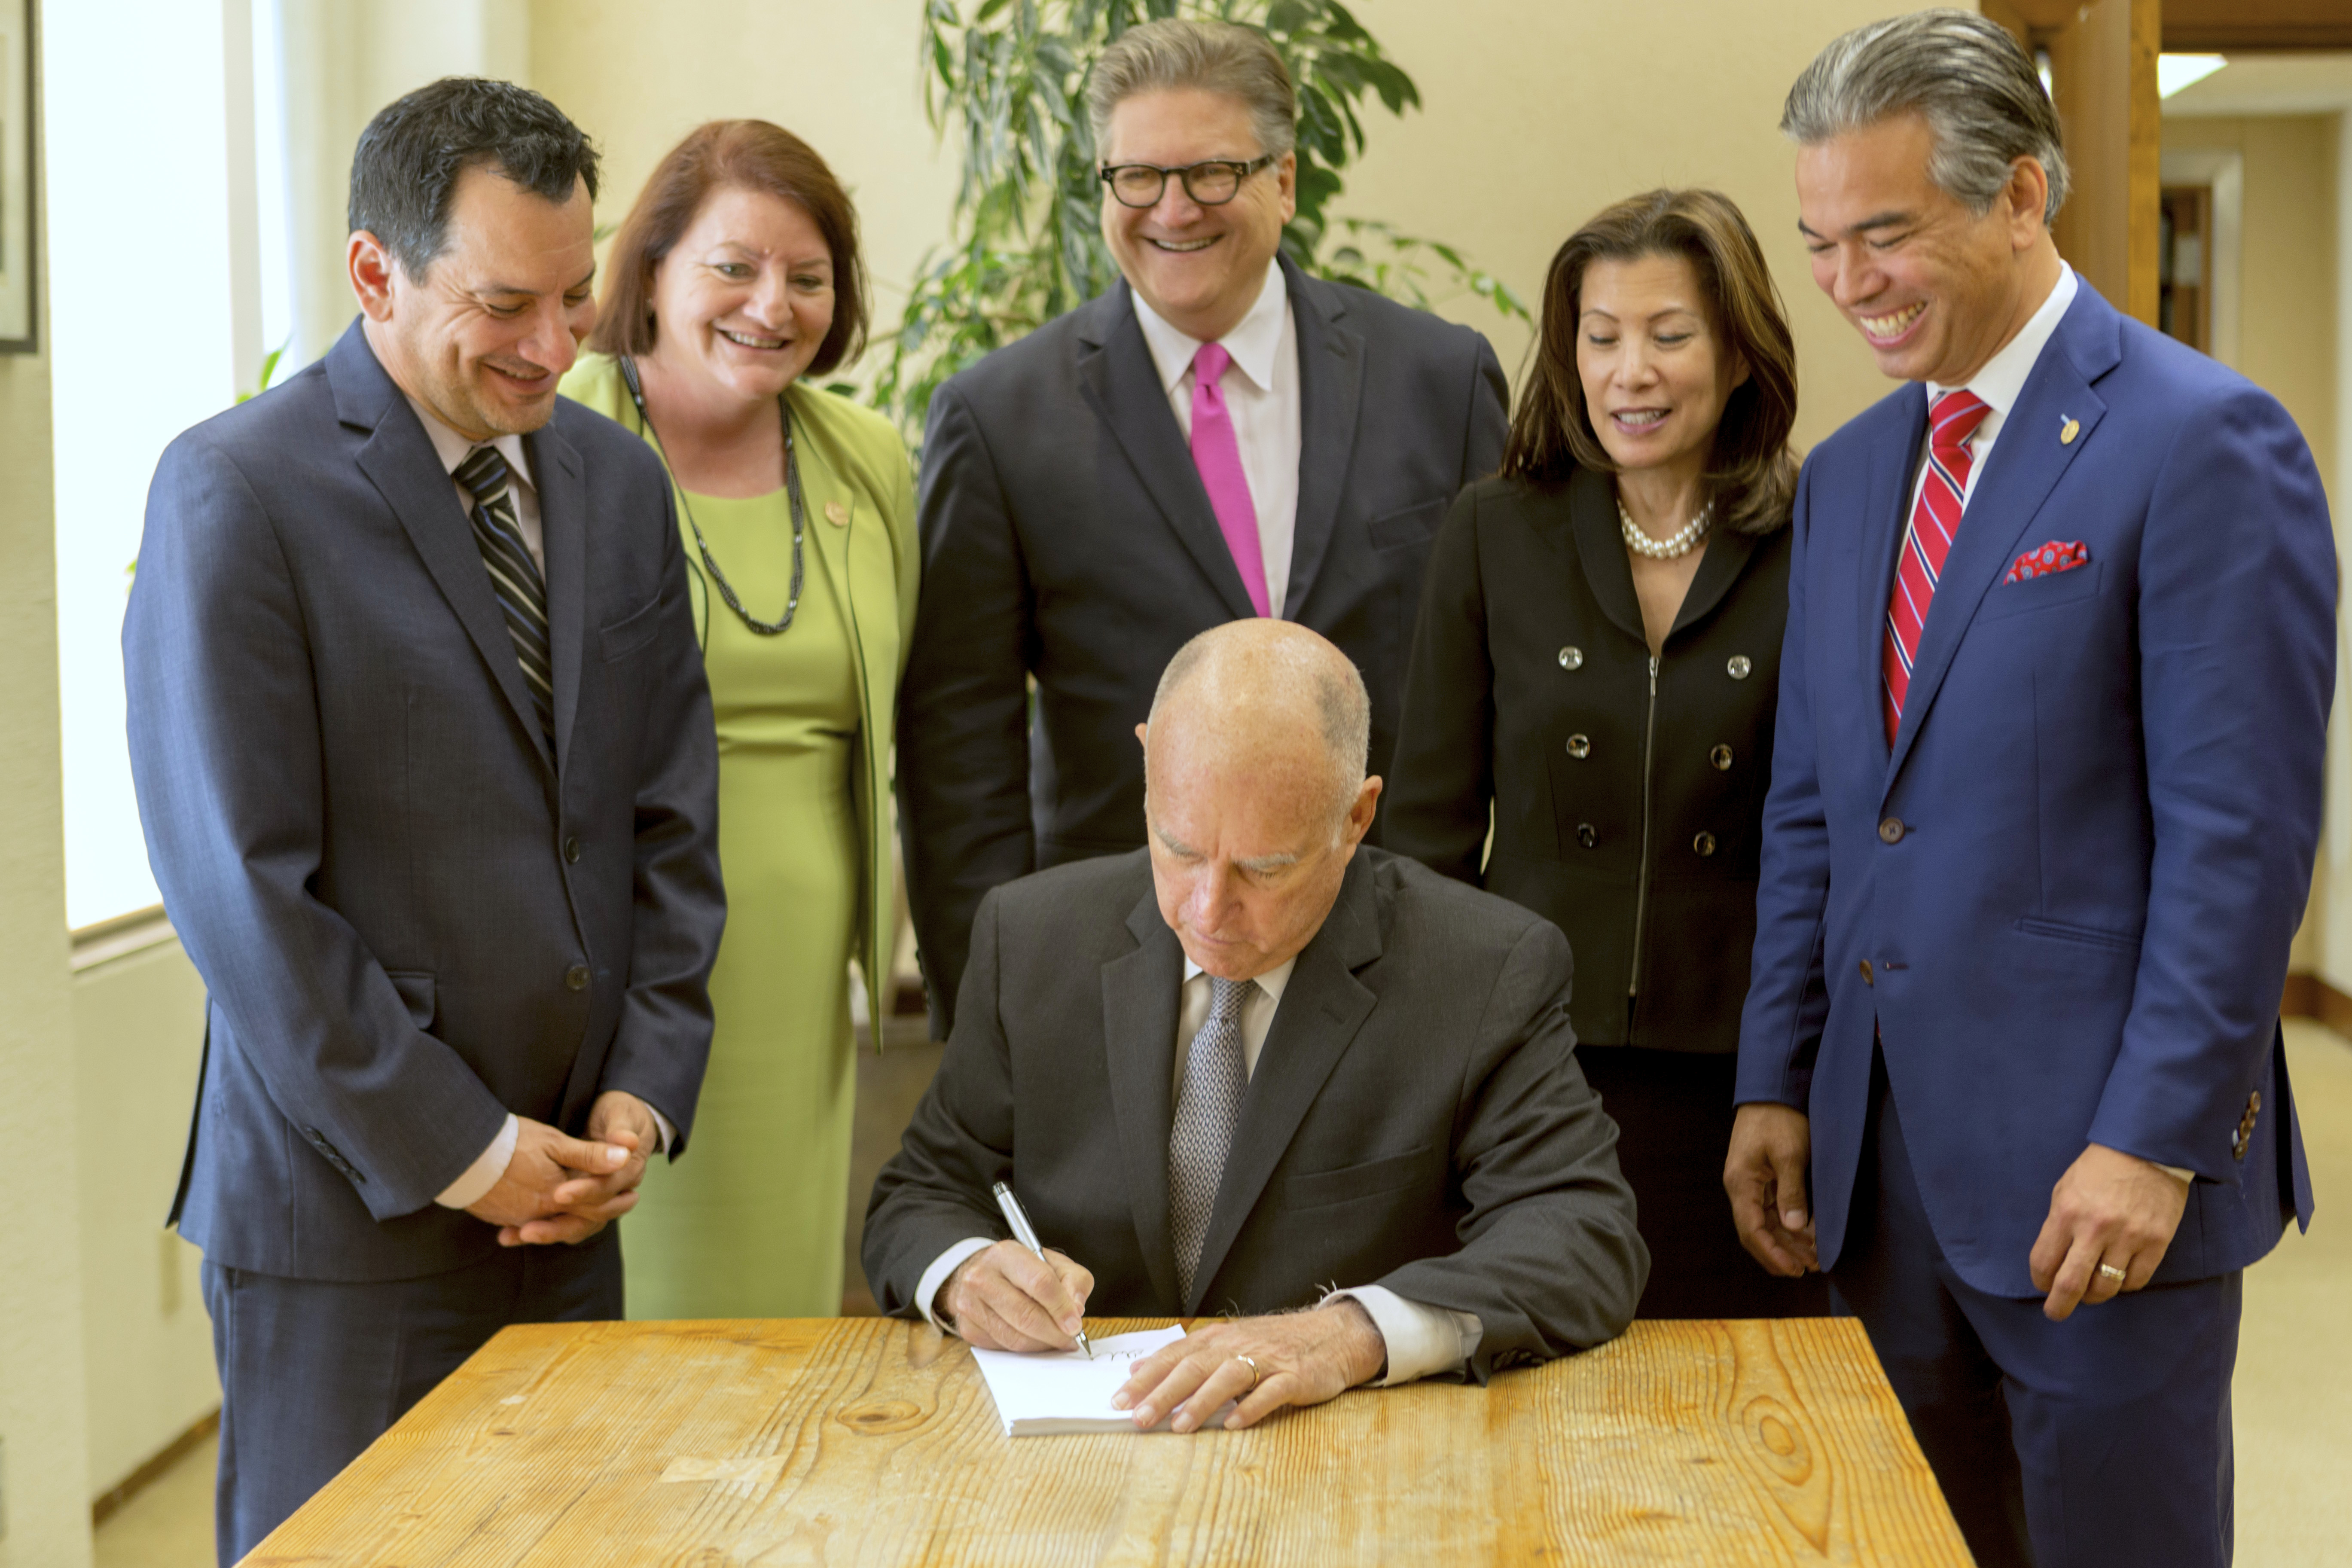 Signing SB 10. Left to right: Assembly Speaker Anthony Rendon, Senate President pro Tempore Toni Atkins, Gov. Jerry Brown, Sen. Robert Hertzberg, Chief Justice Tani Cantil-Sakauye and Assemblyman Rob Bonta. (Photo courtesy of the Governor’s Office)